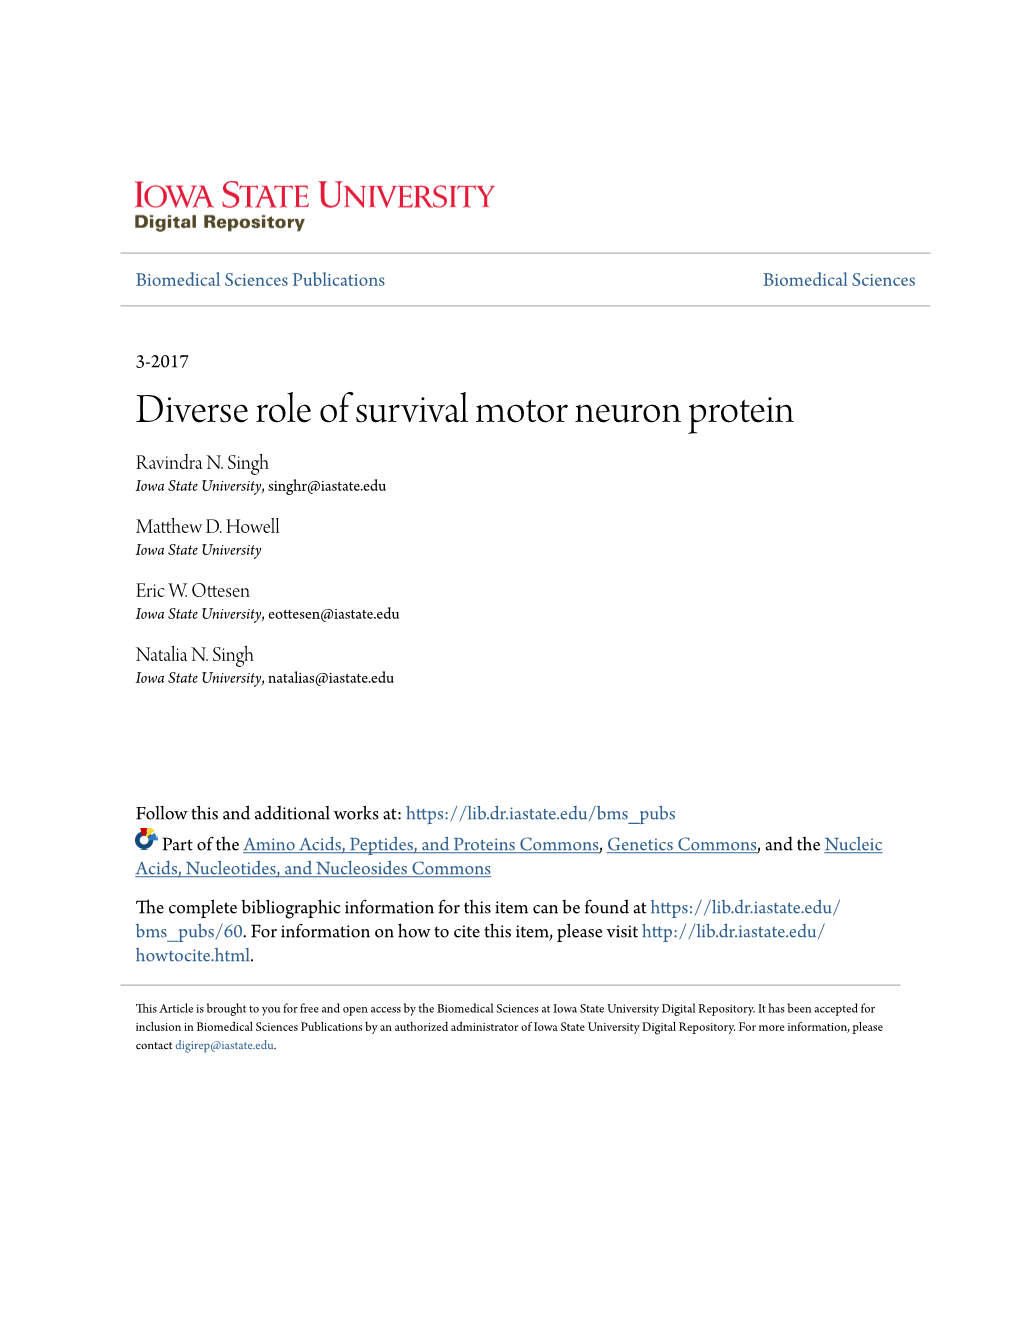 Diverse Role of Survival Motor Neuron Protein Ravindra N